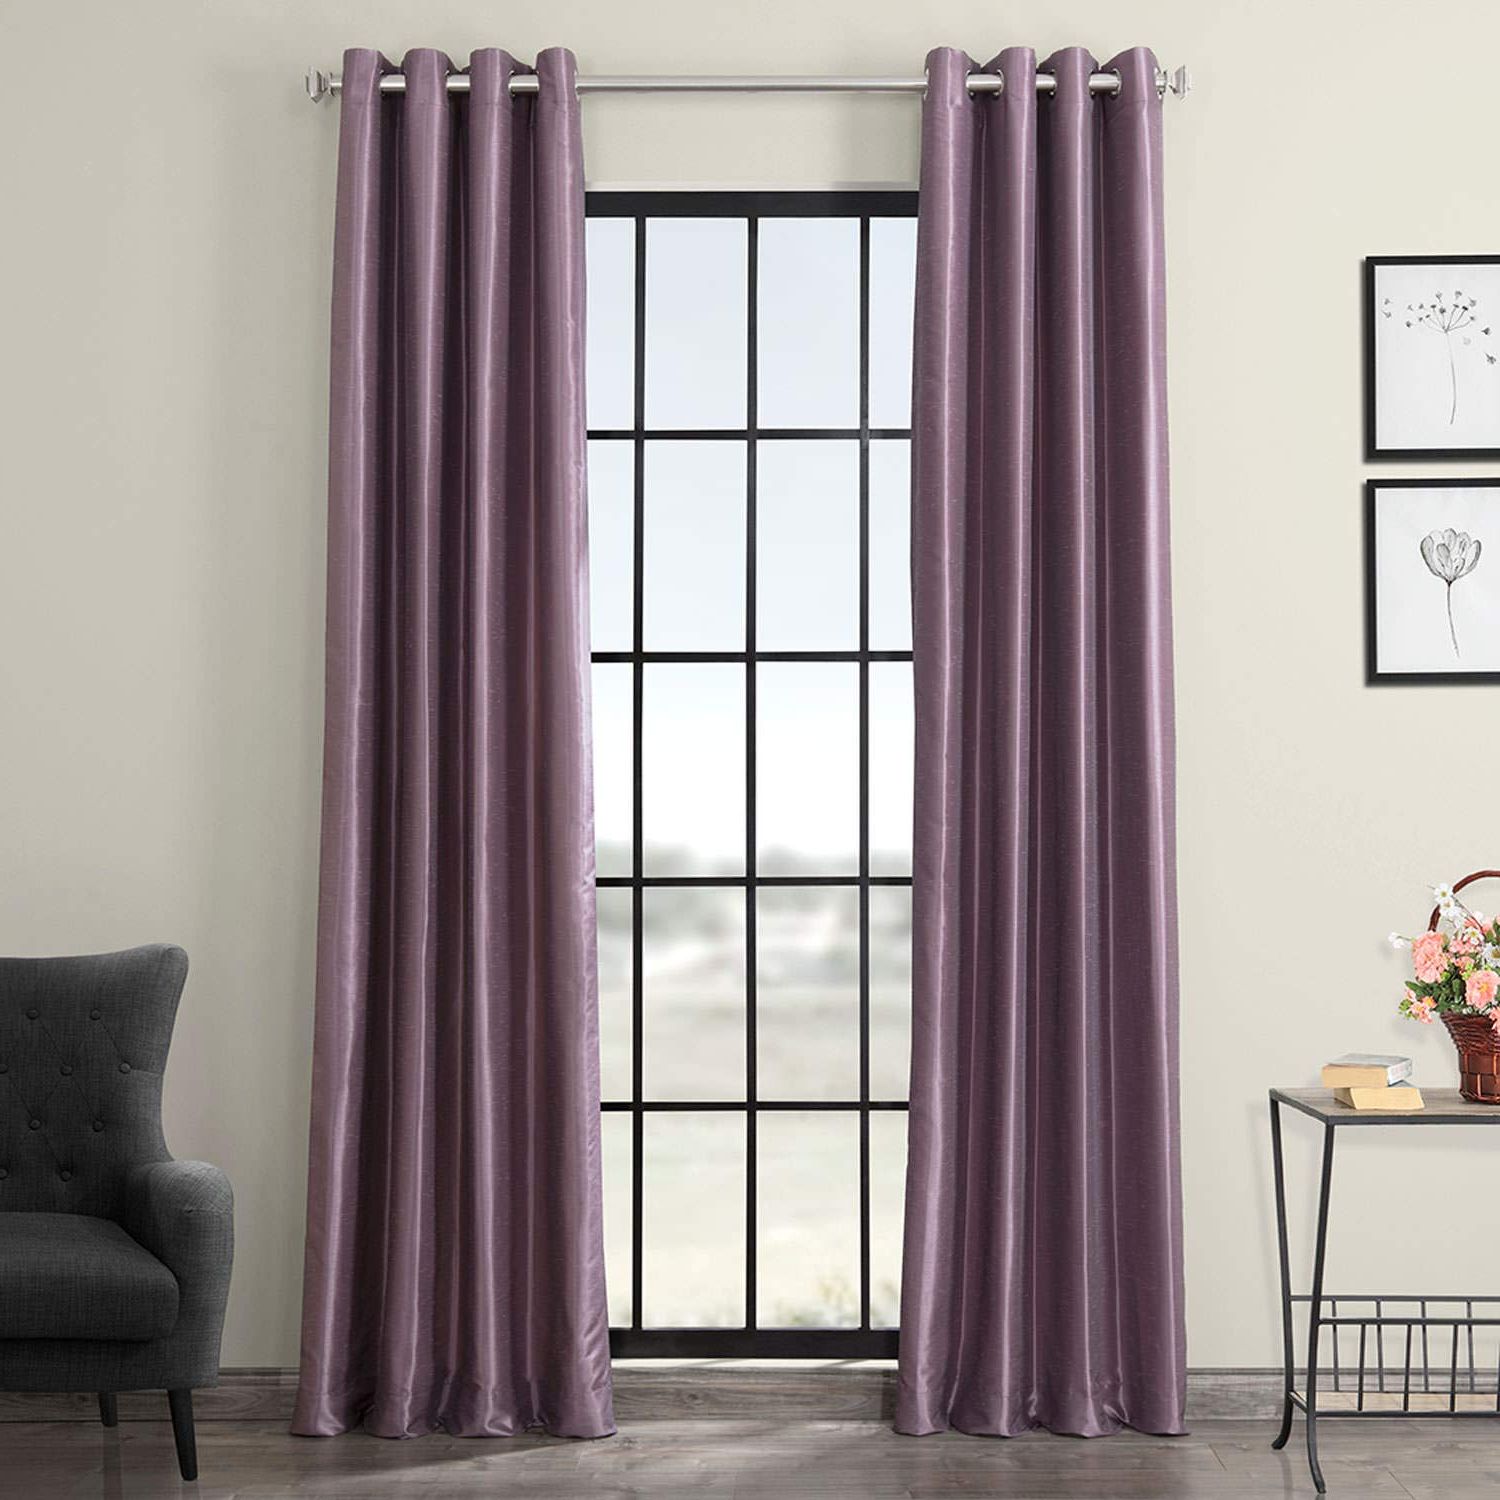 2021 Off White Vintage Faux Textured Silk Curtains Within Half Price Drapes Pdch Kbs11 84 Grbo Grommet Blackout Vintage Textured Faux  Dupioni Silk Curtain, Smokey Plum (View 18 of 20)